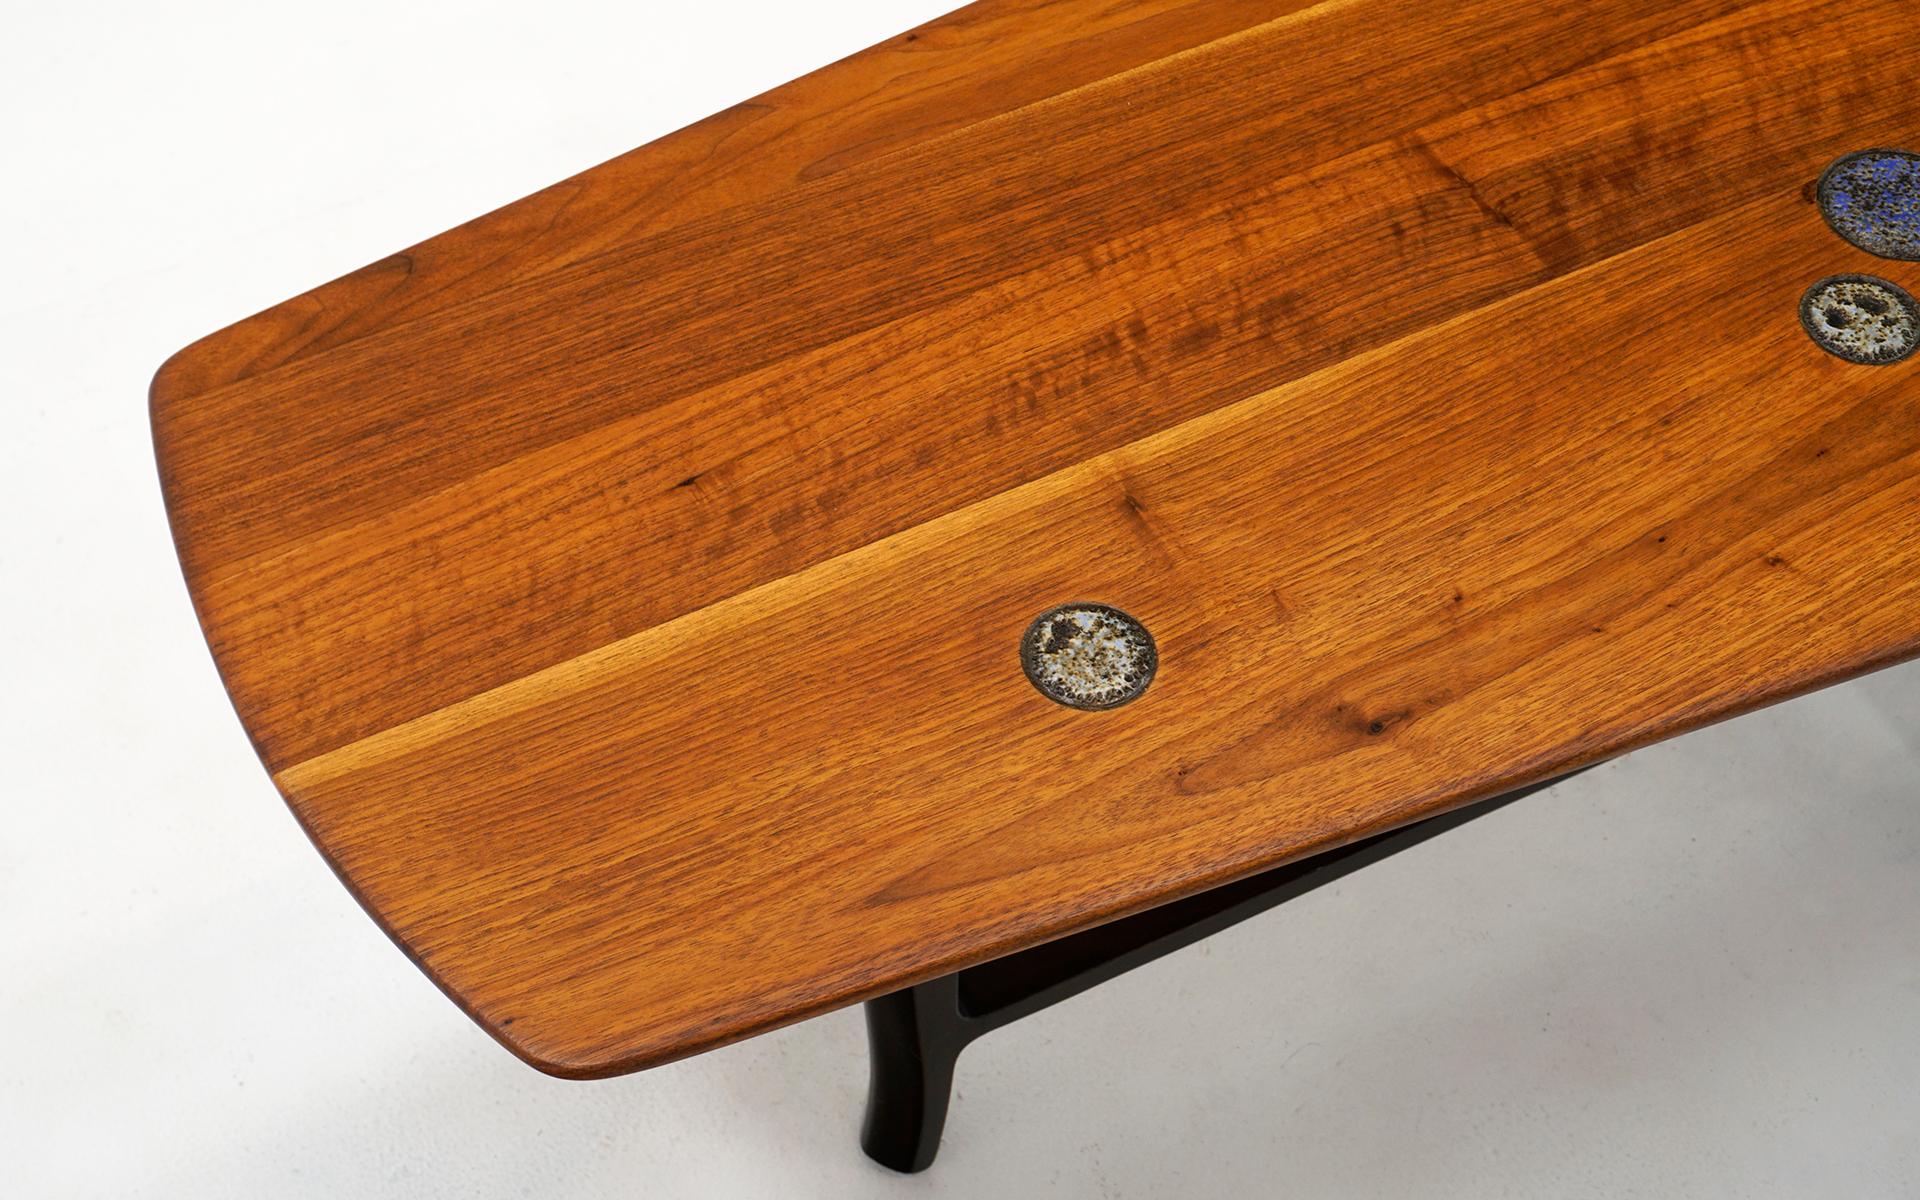 Mid-20th Century Walnut and Mahogany Coffee Table with Natzler Tiles by Edward Wormley for Dunbar For Sale